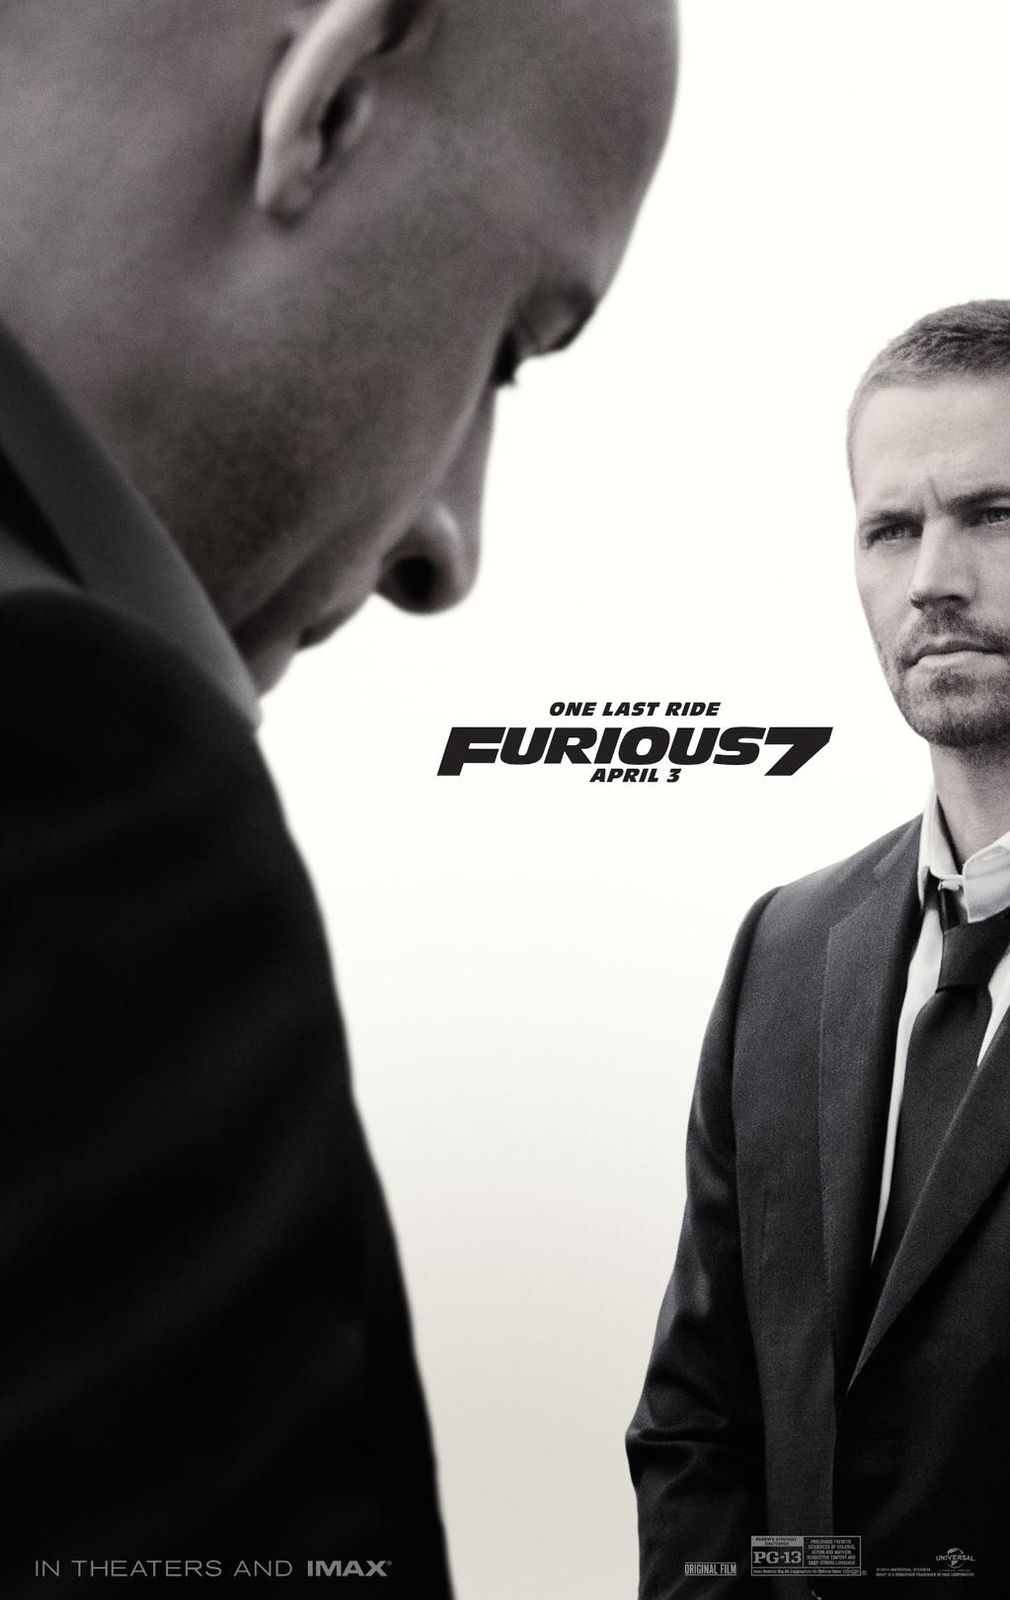 Furious 7 becomes fastest movie to hit $1 billion worldwide